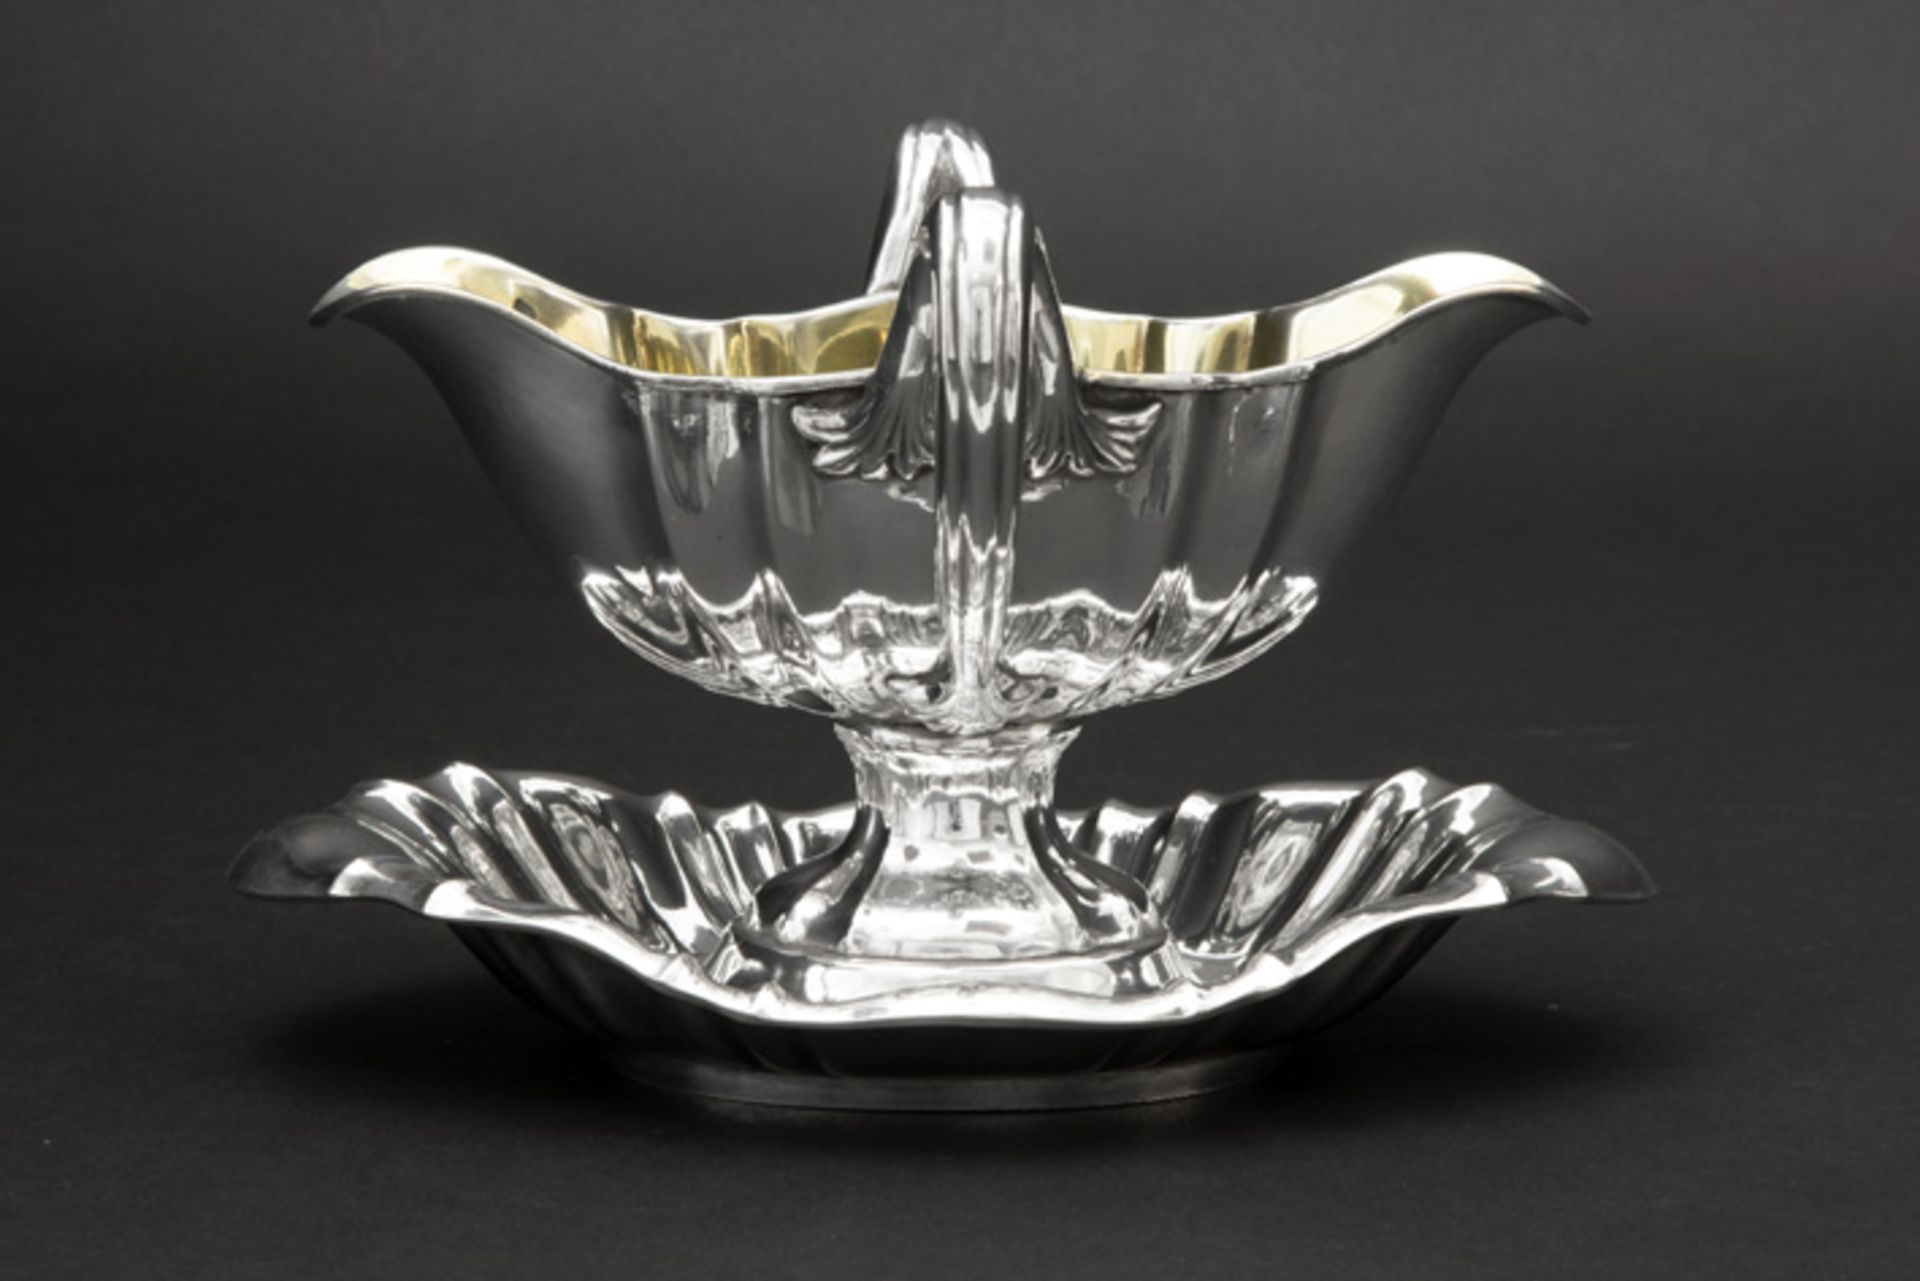 antique Belgian "Wolfers" signed Louis XV style sauce boat in marked silver WOLFERS (1852 - 1892)